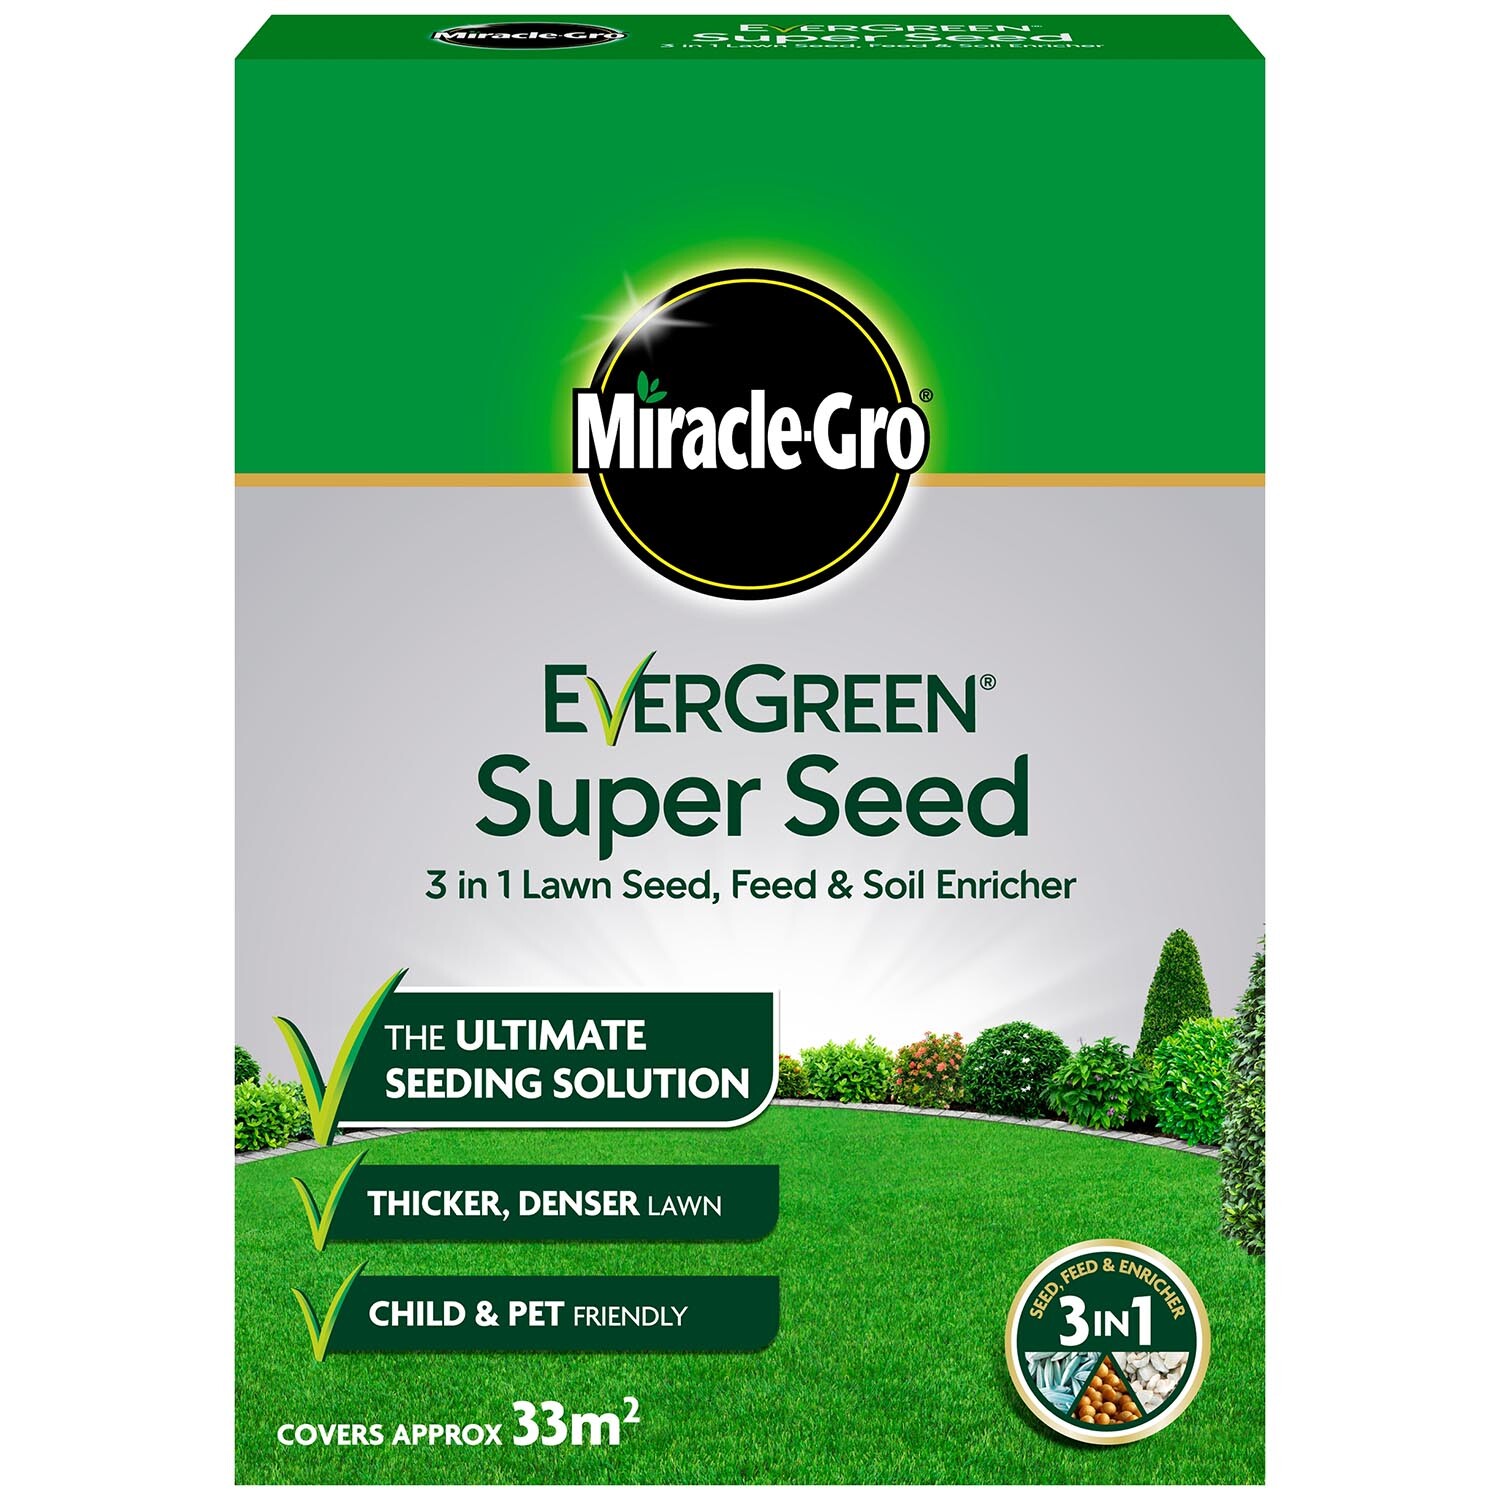 Miracle Gro Evergreen Super Lawn Seed Image 1